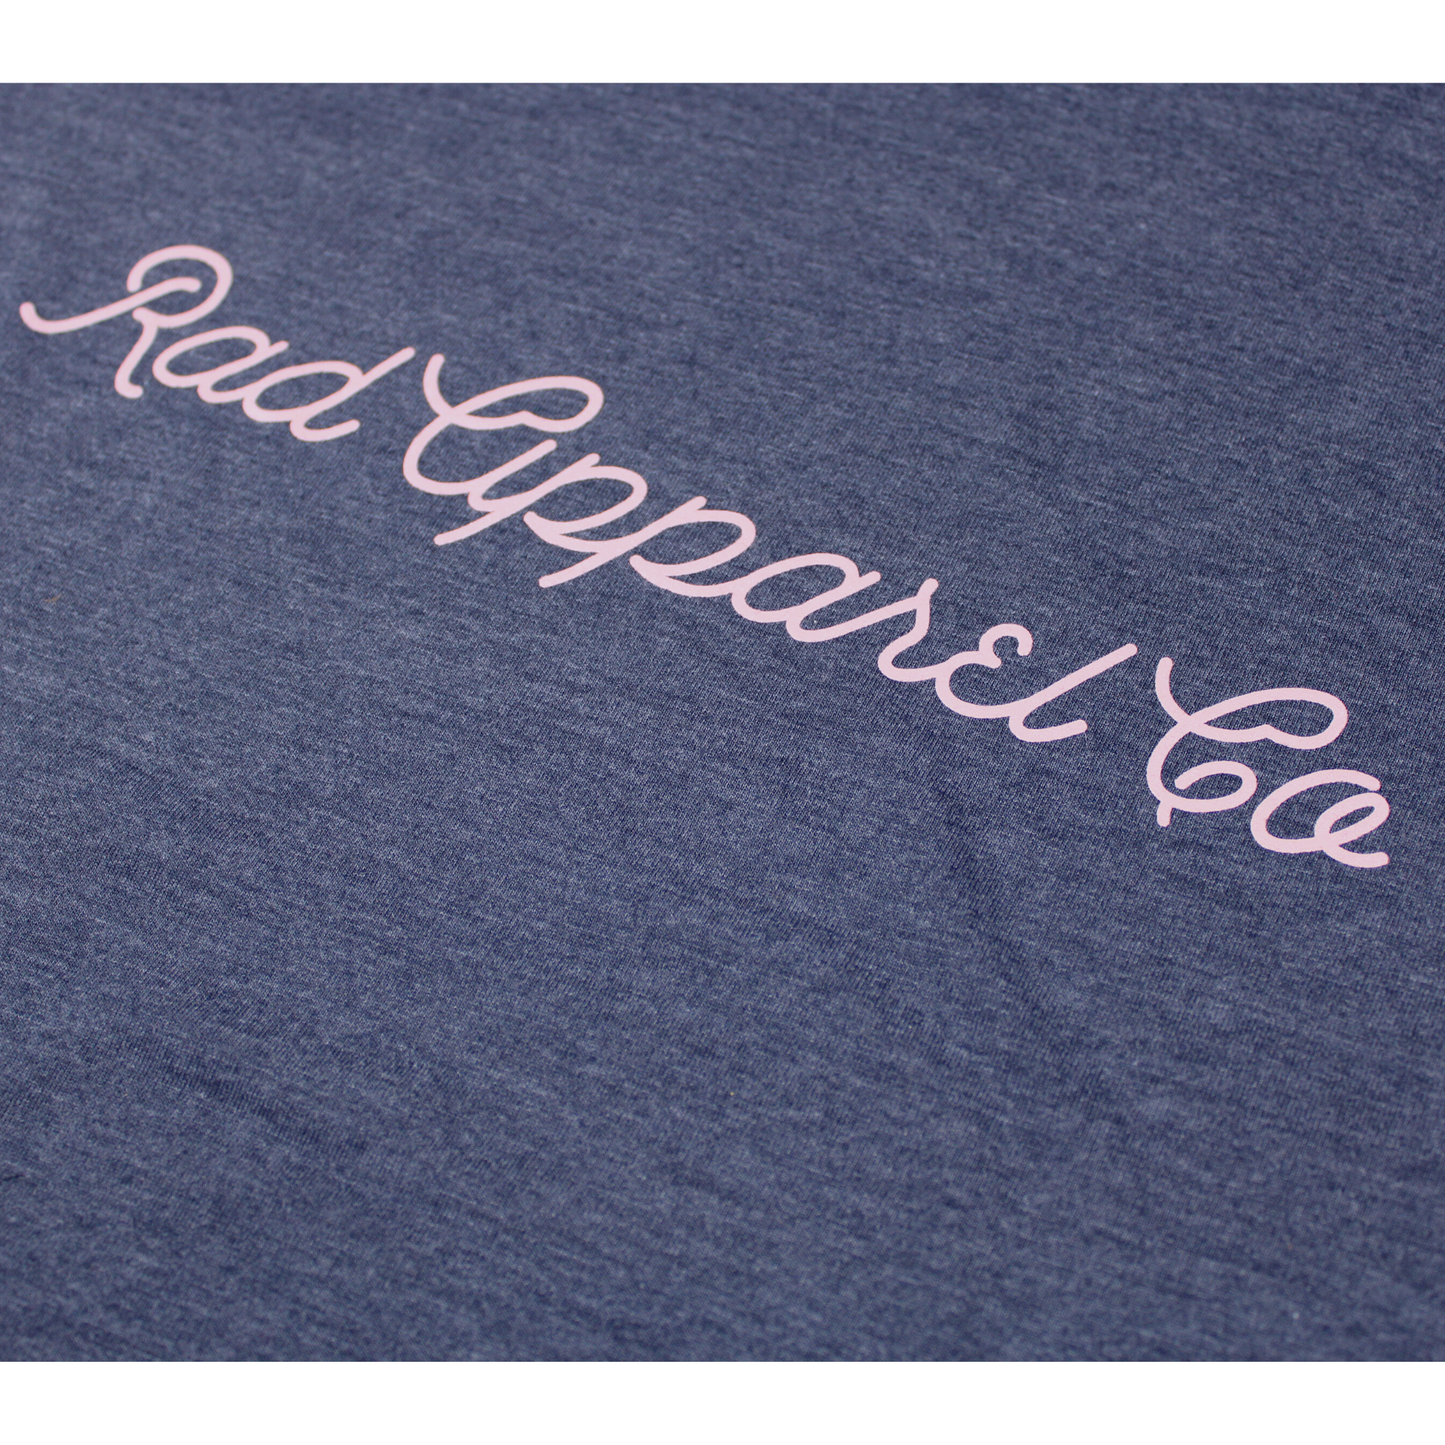 RAD ladies Rad apparel co tech tee in blue and pink